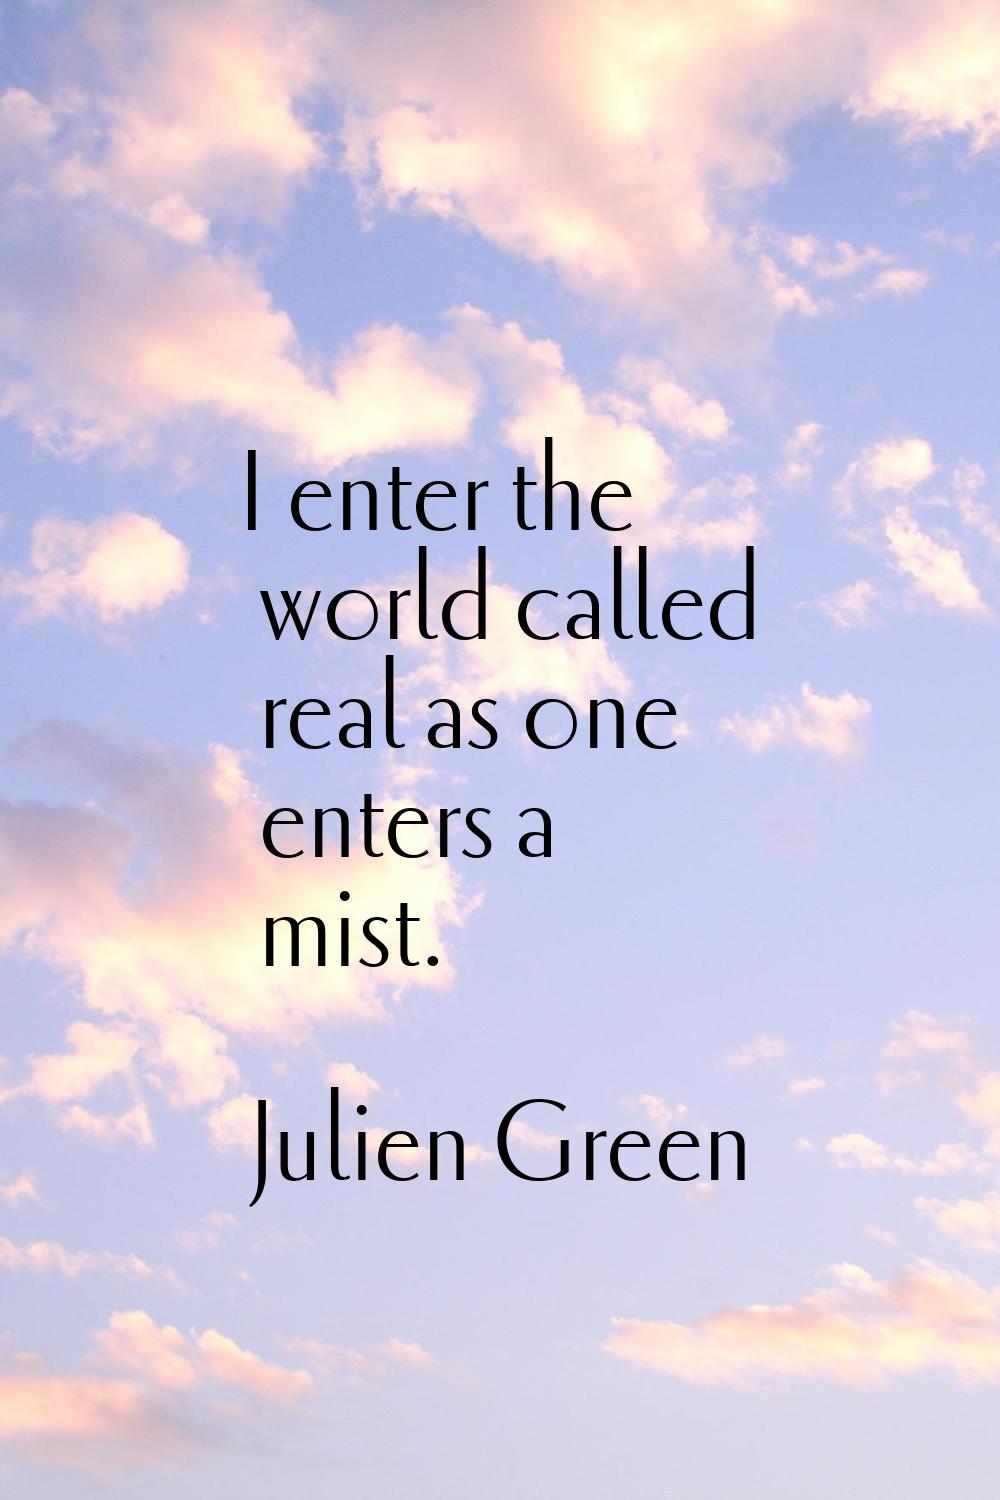 I enter the world called real as one enters a mist.